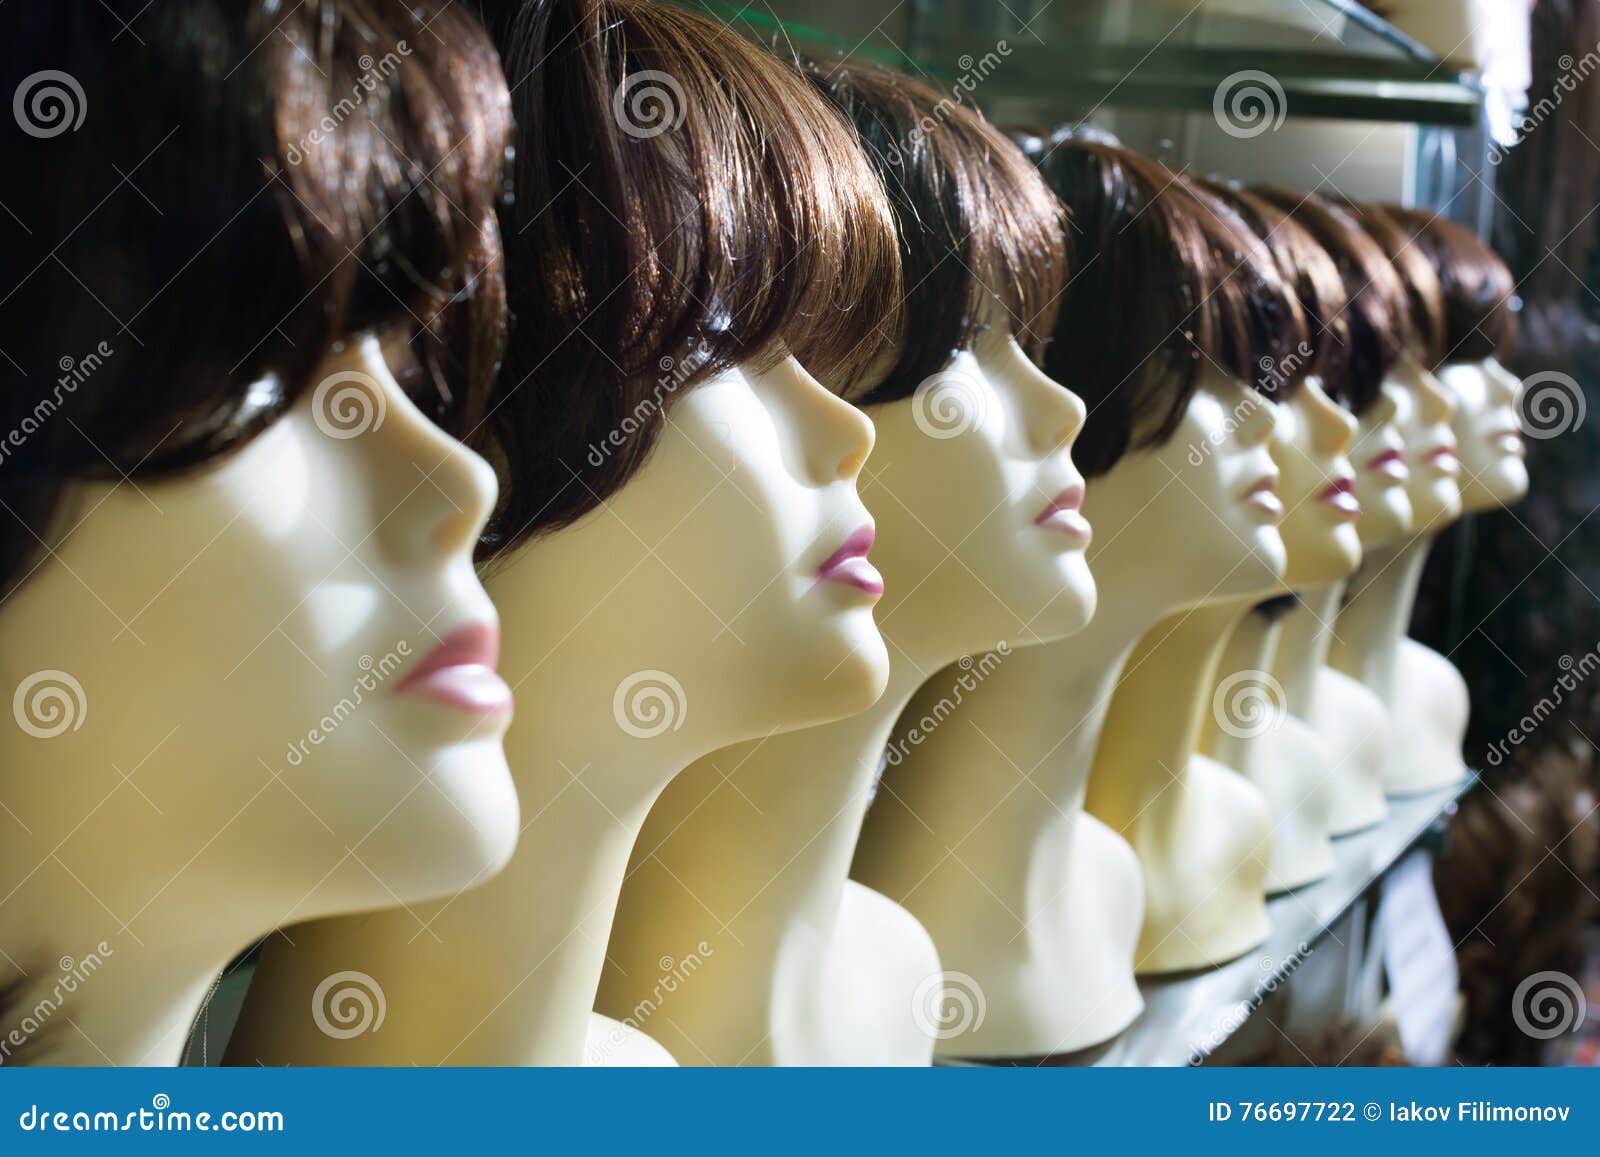 Dummies Heads with Hair Style in Shop Stock Photo - Image of periwig,  peruke: 76697722